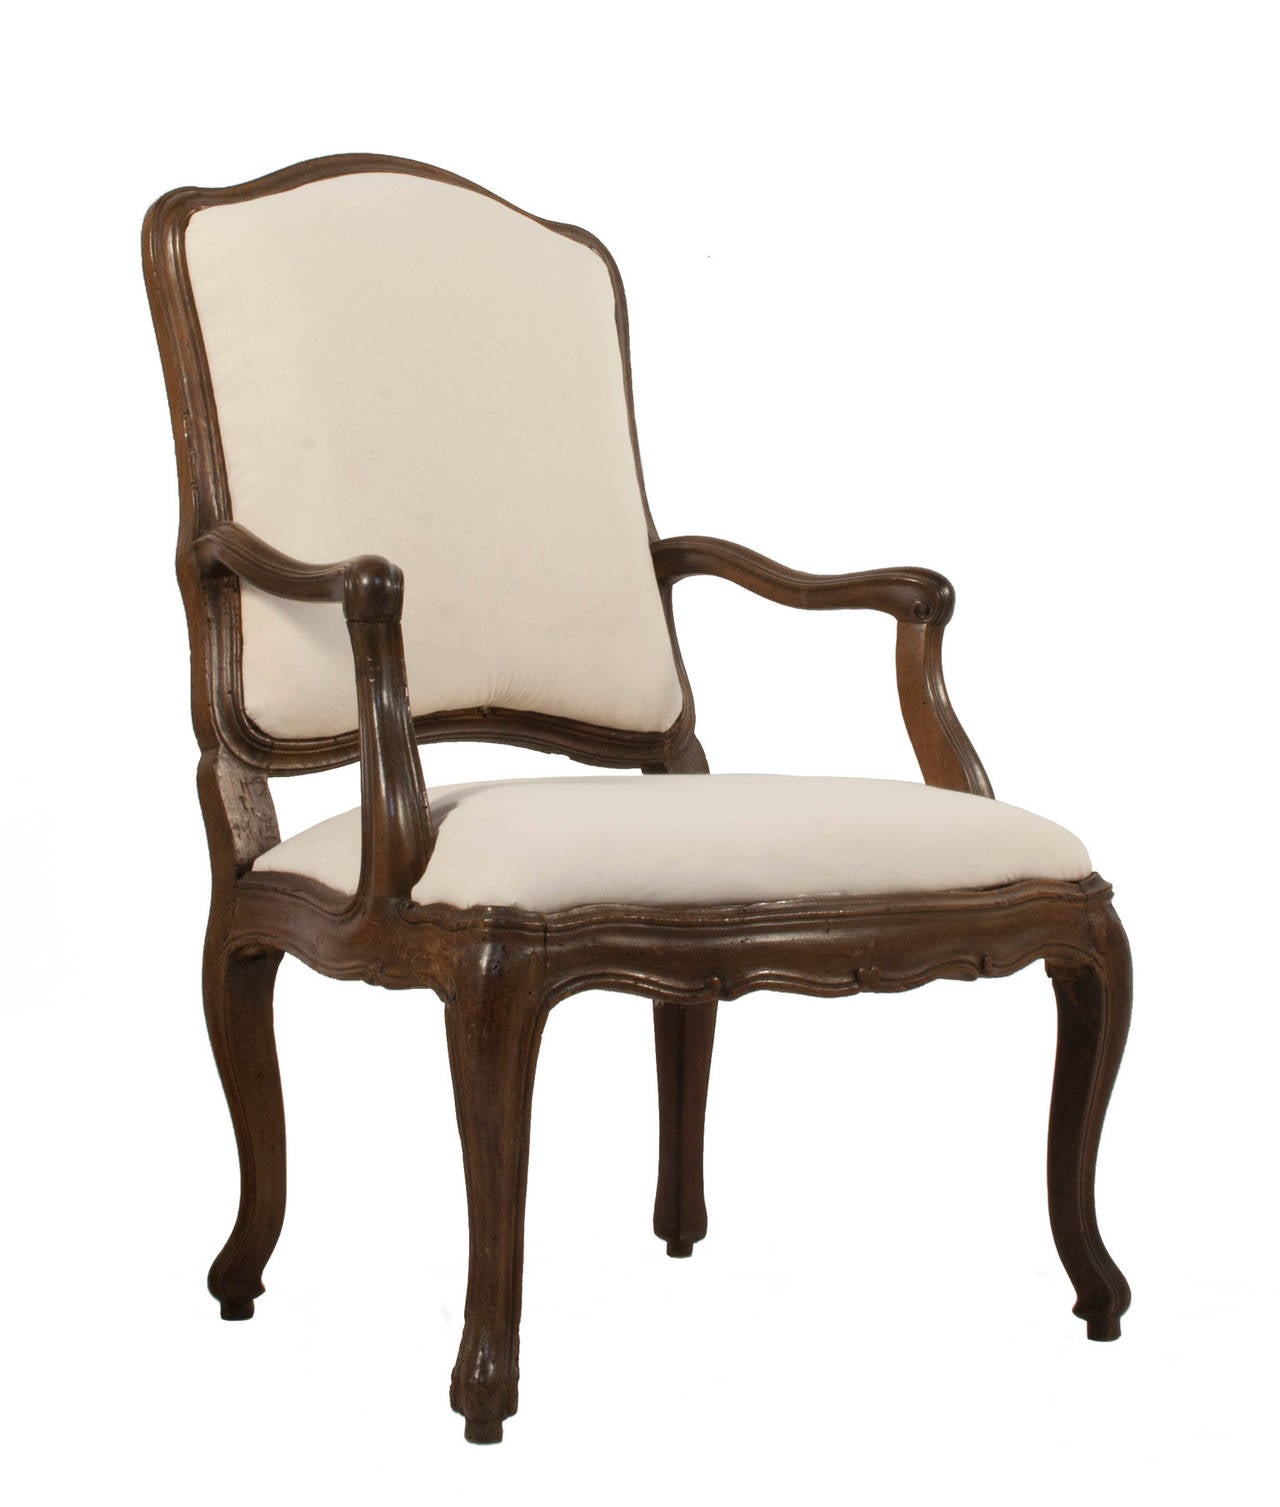 Pair of Baroque armchairs in walnut.